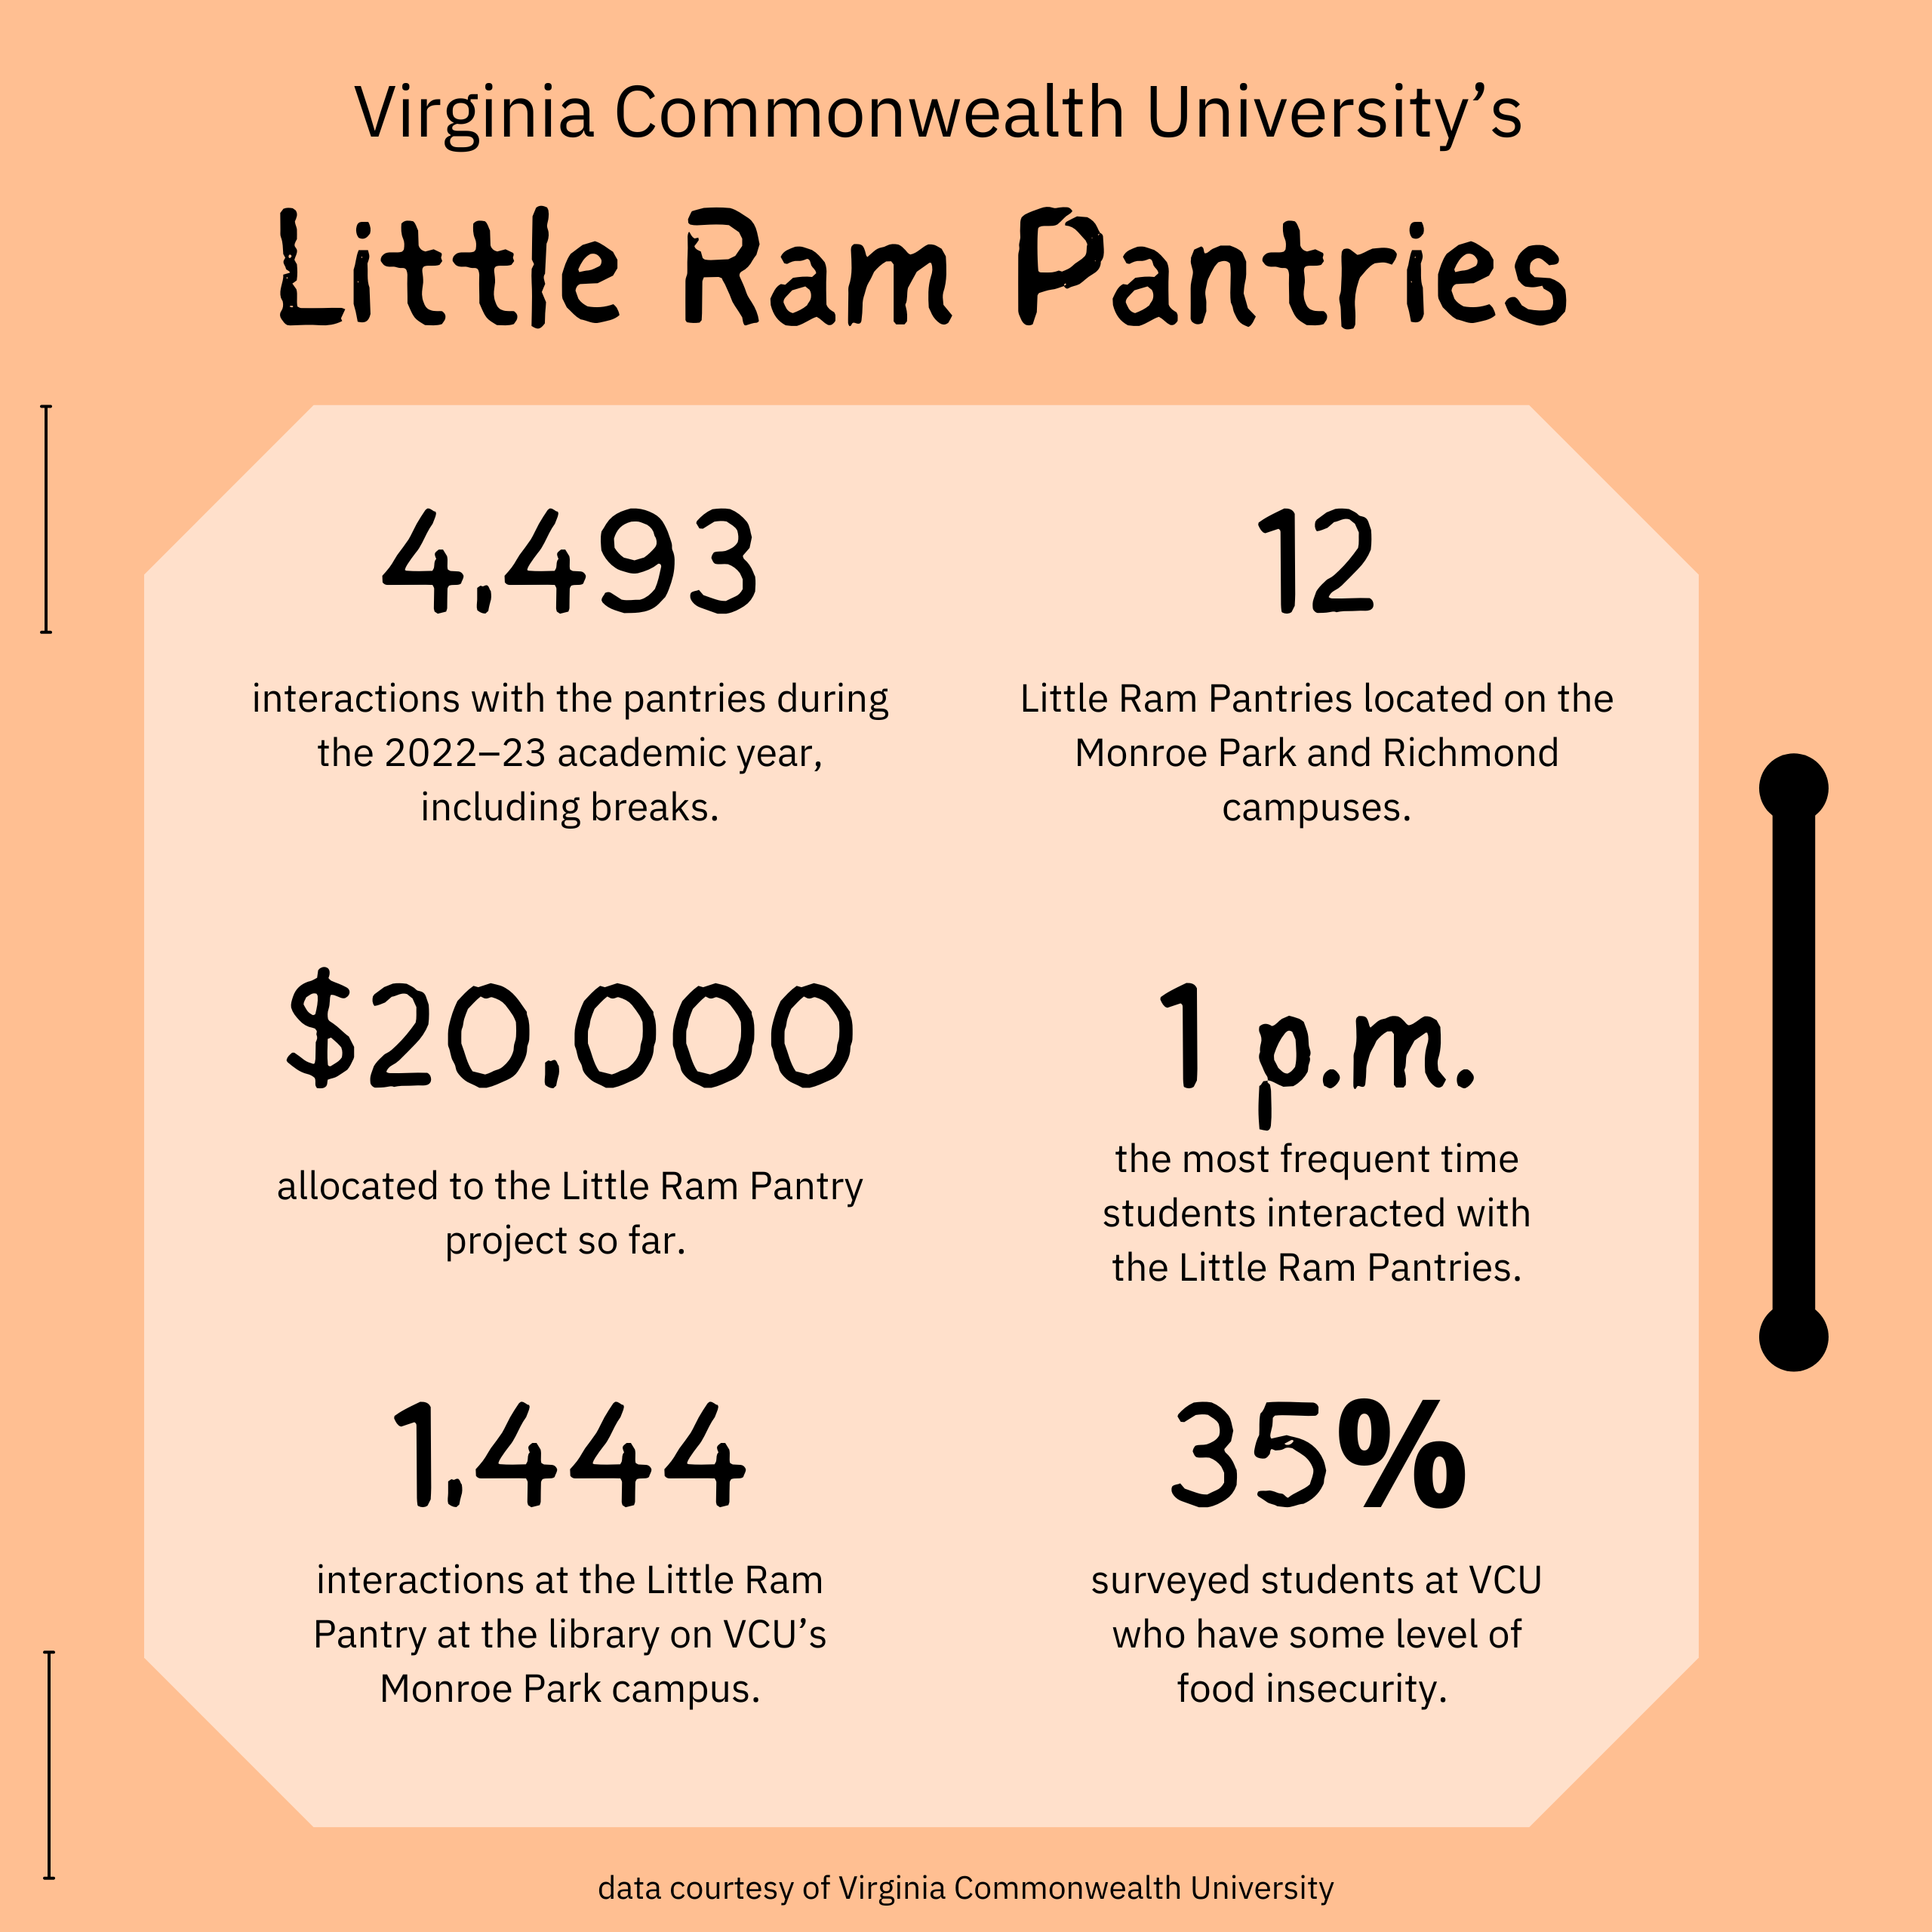 An infographic featuring data from the Little Ram Pantries at Virginia Commonwealth University